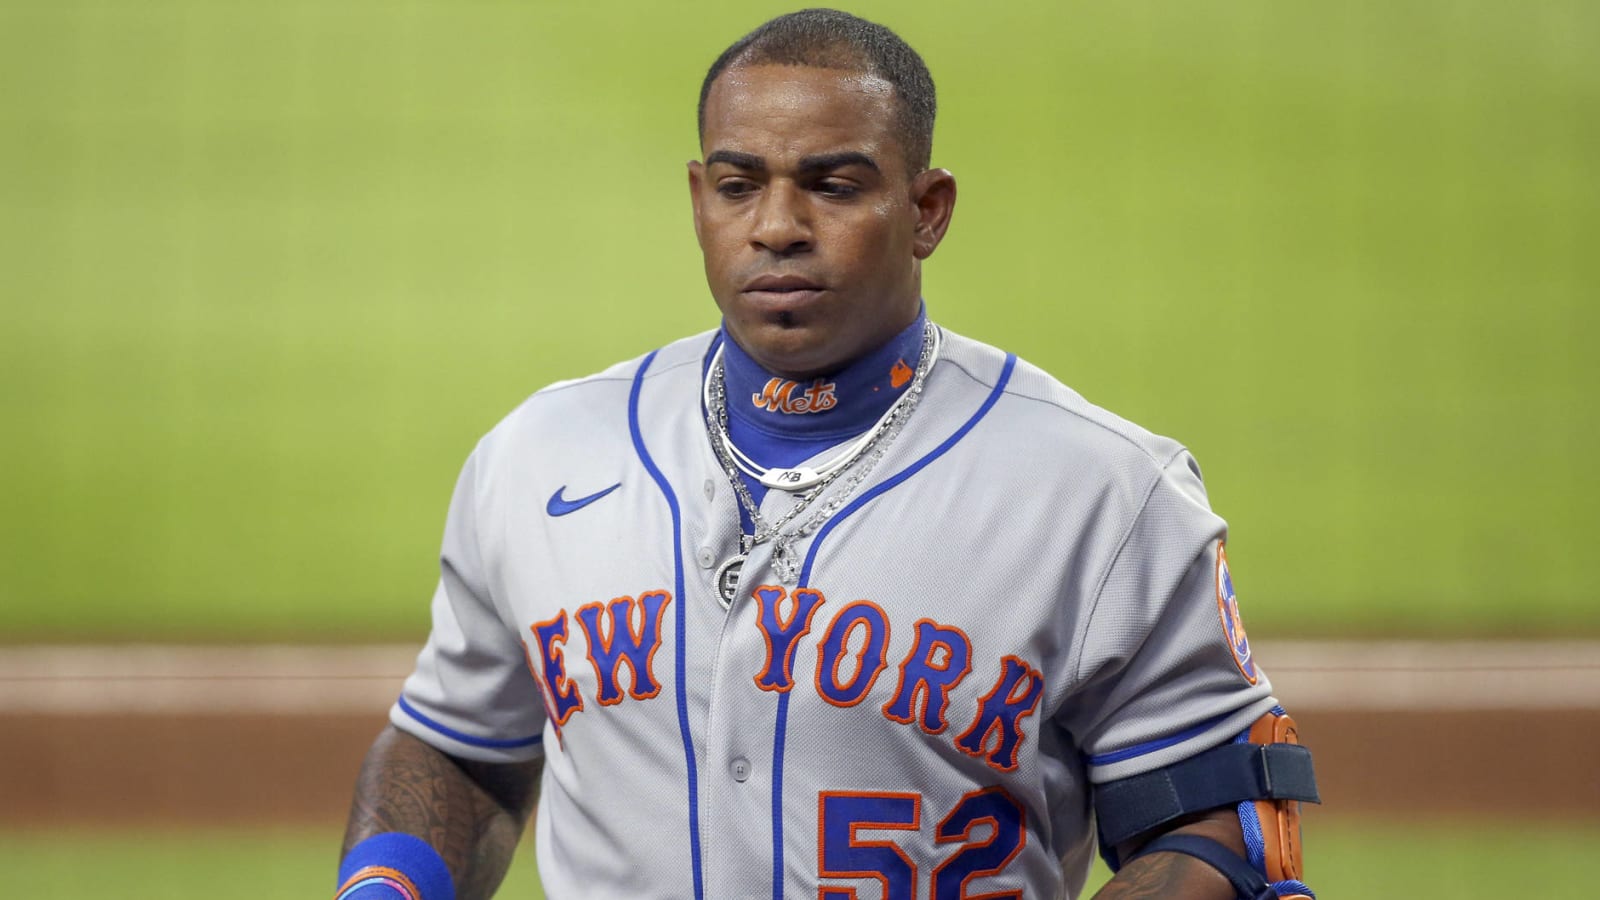 Cespedes opted out due to issues with Mets?